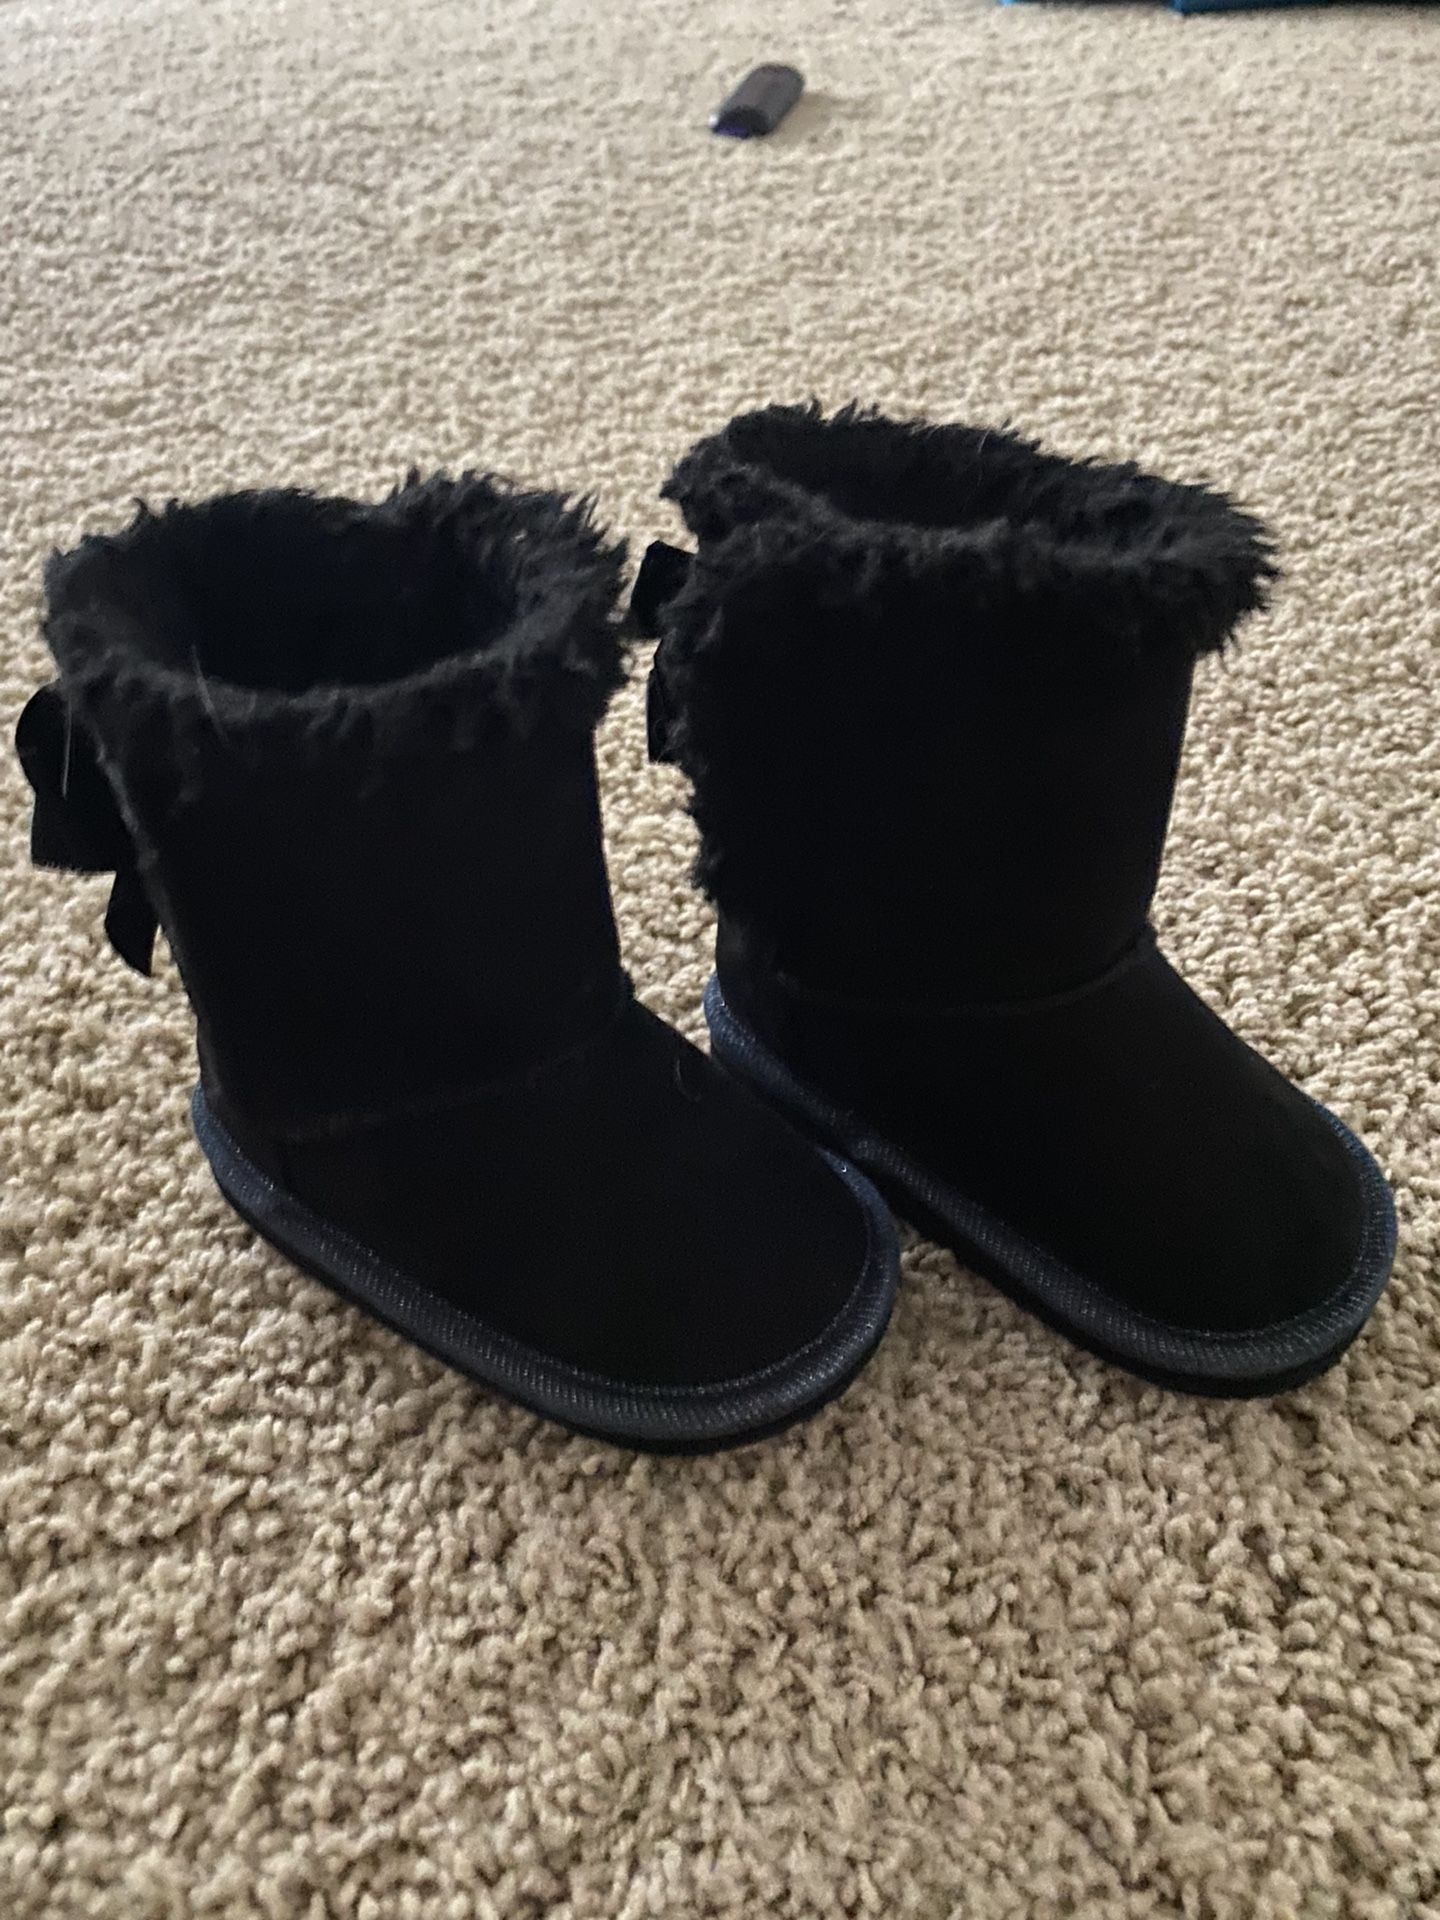 Toddler Black Fuzzy Boots With Bows Size 4